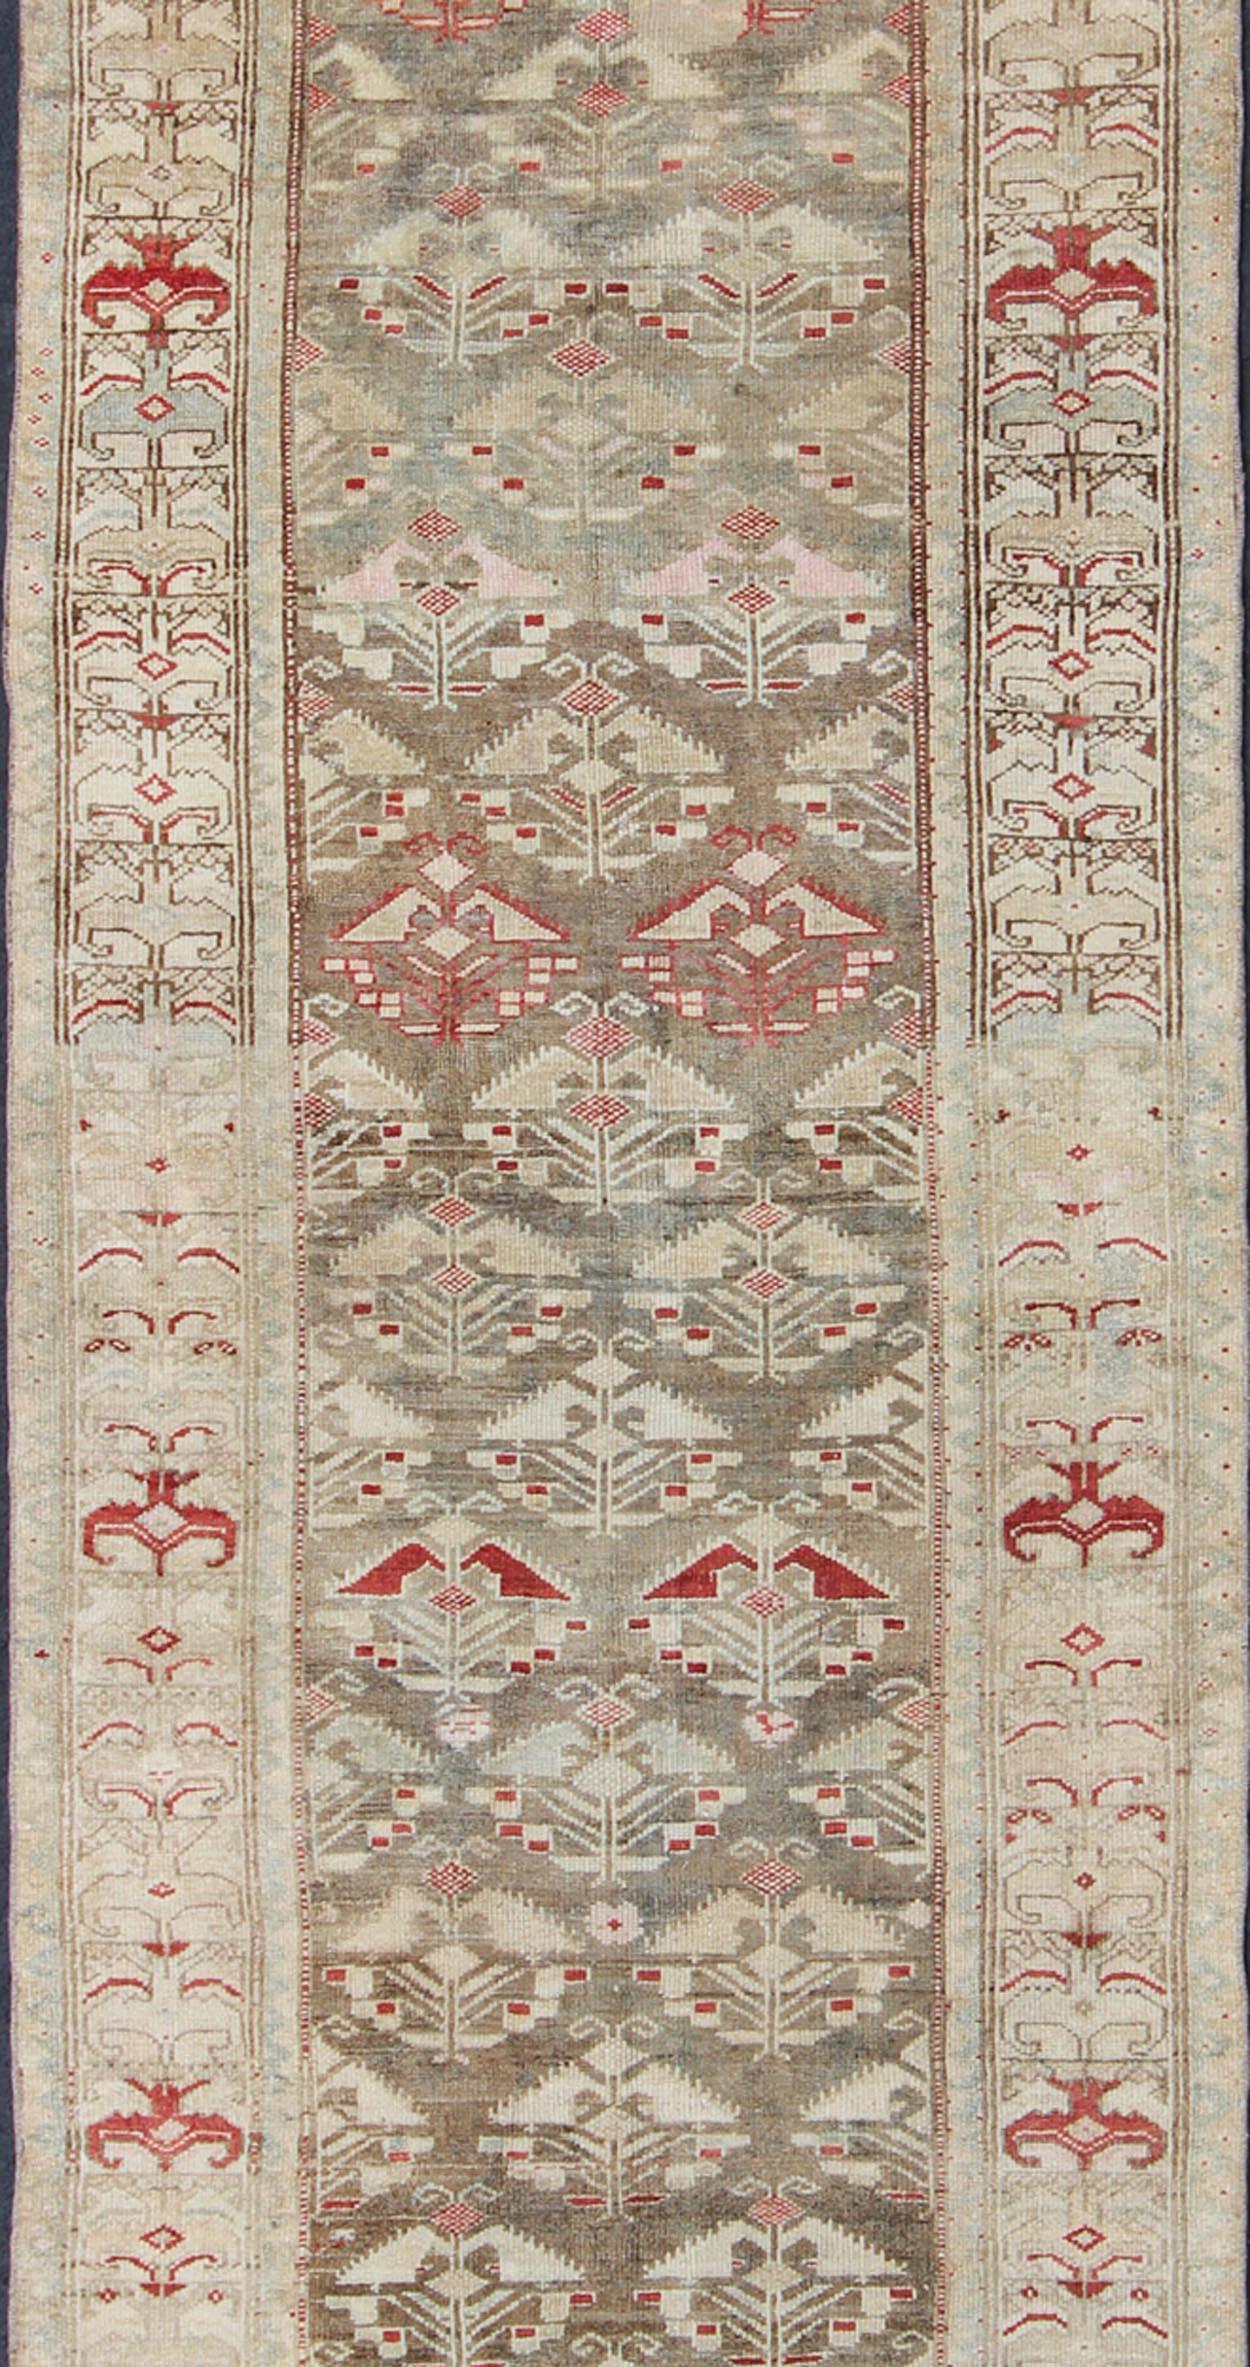 Tribal Antique Persian Kurdish Runner with Repeating Geometric in Gray Green, Neutrals